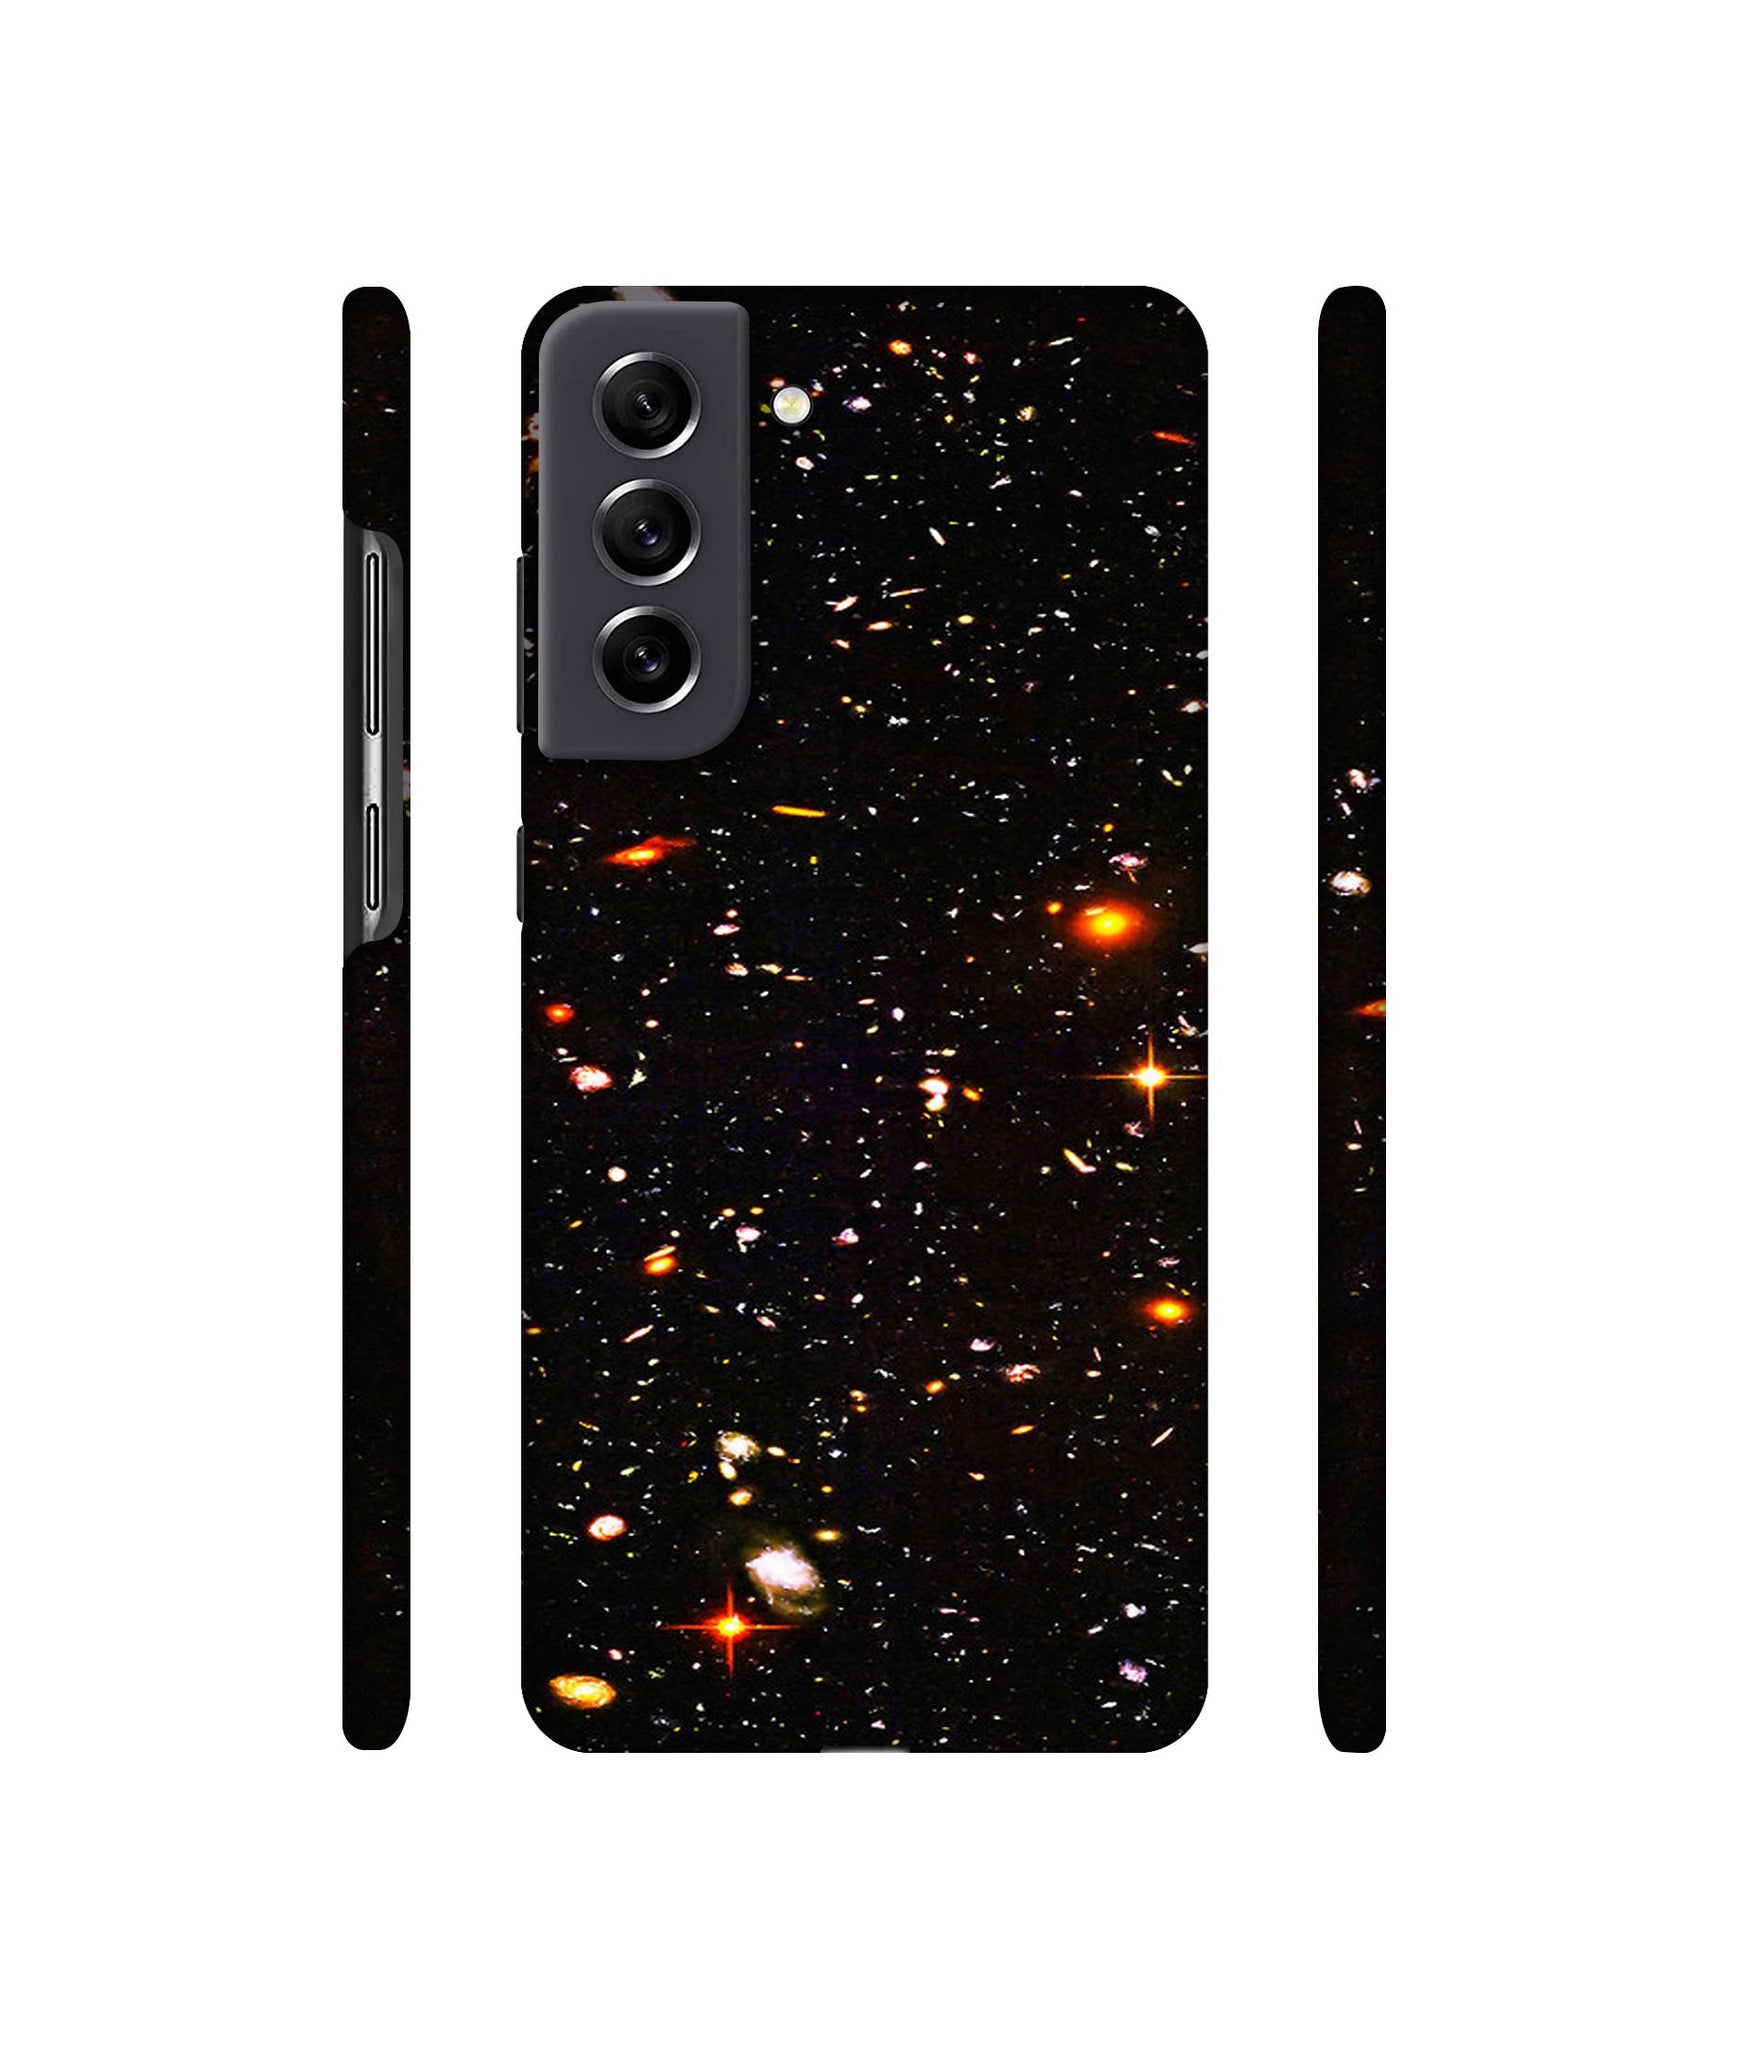 Hubble Field Designer Hard Back Cover for Samsung Galaxy S21 FE 5G